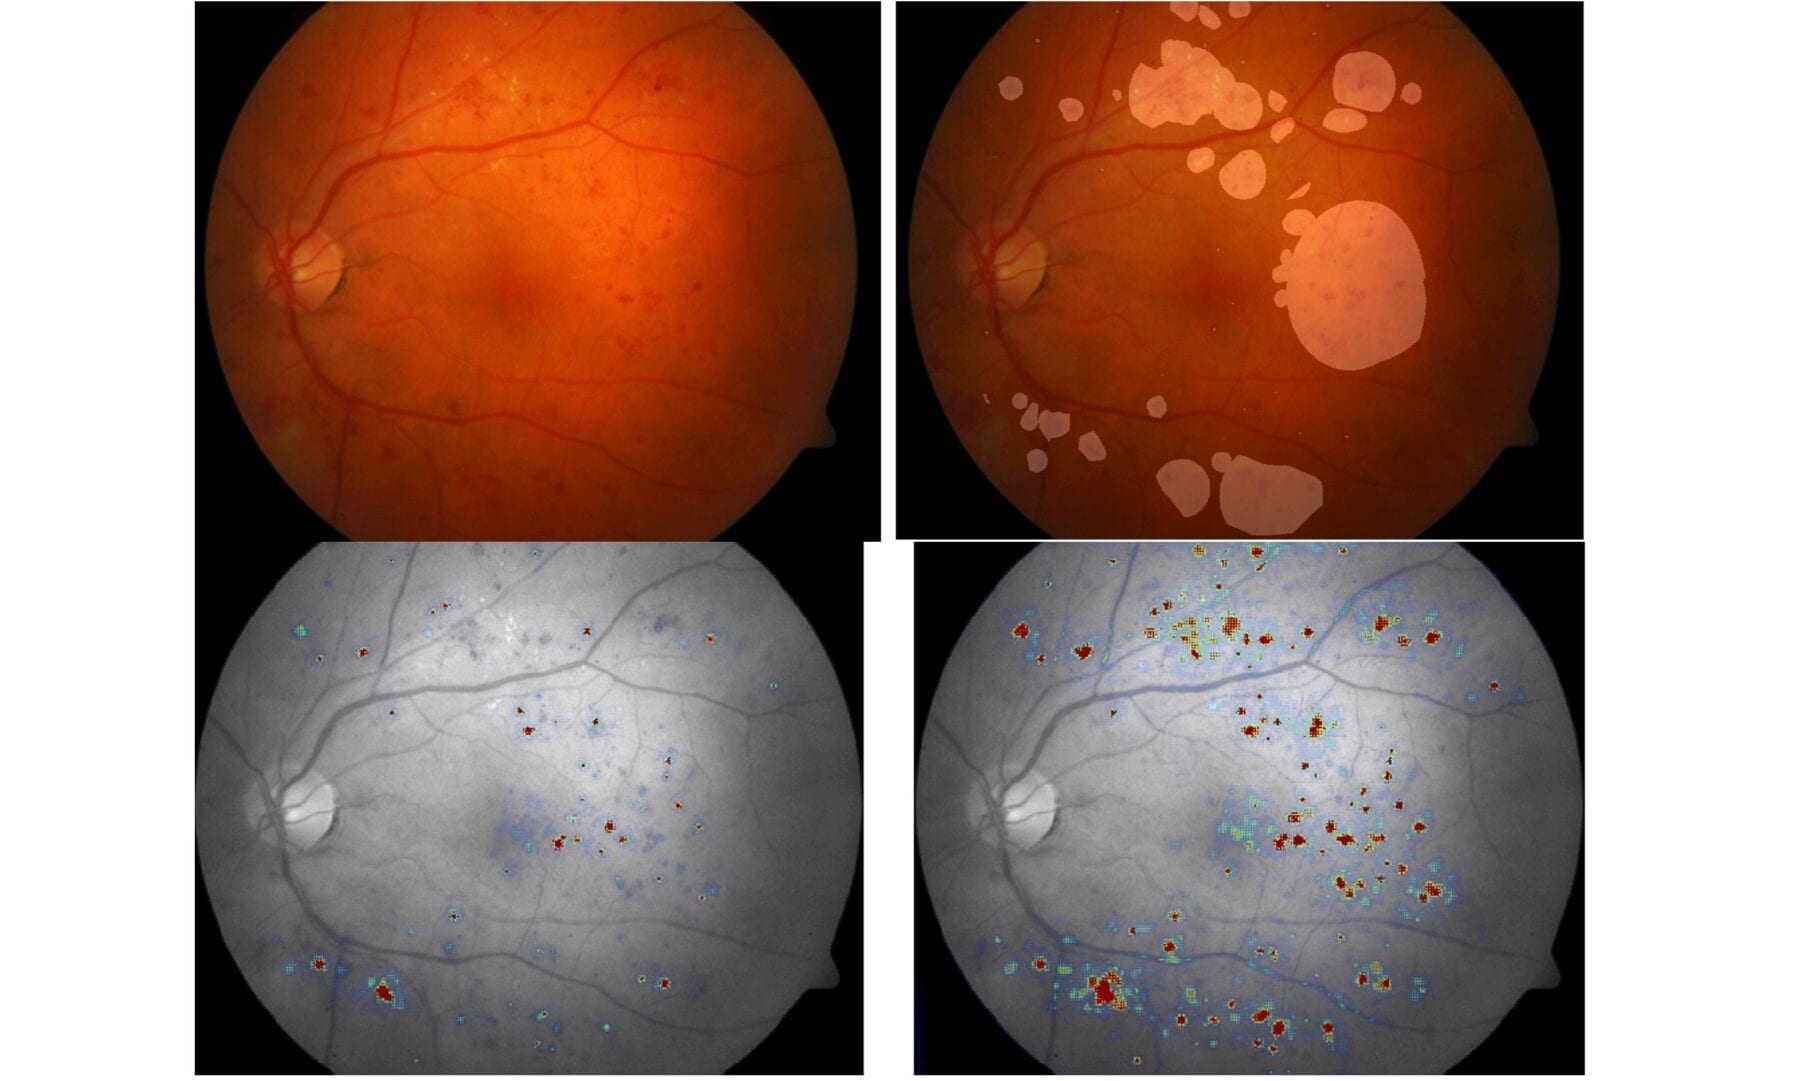 This series shows the four different stages of the same eye scan described in this article. From left to right: the original image; with highlights of anomalies by human experts; with highlights of anomalies by one scan by an AI system; with highlights of anomalies made by an iterative series of scans by an AI system. Note that the iterative process yields a more complete overview of the anomalies present than the single assessment.